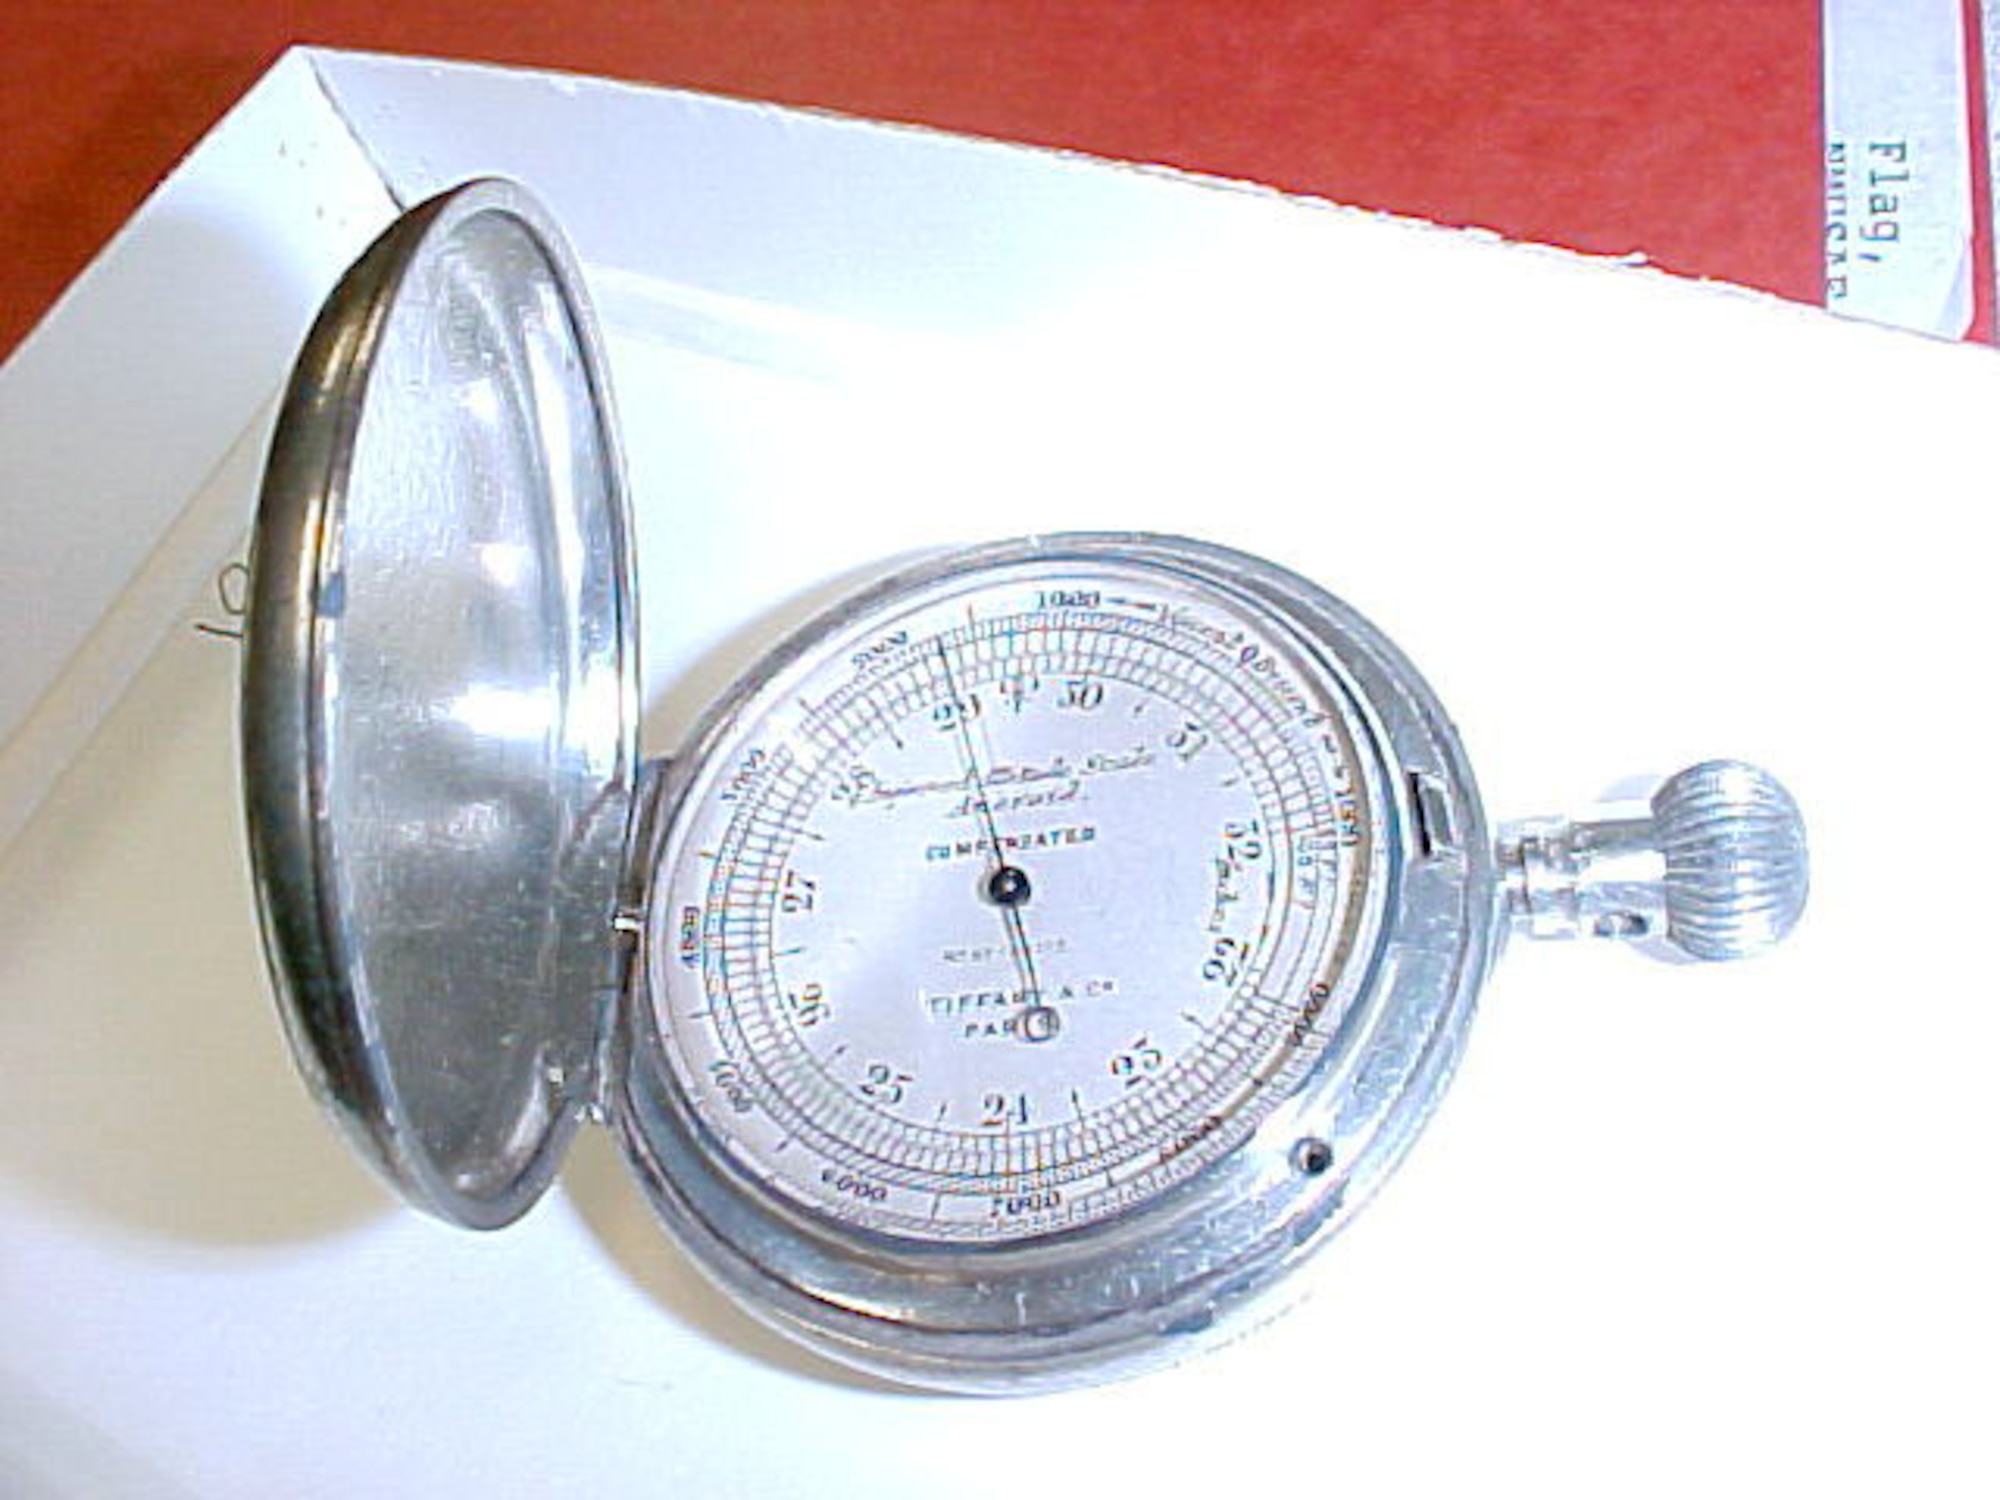 This altimeter indicator belonged to the donor's uncle, William Thaw, who flew with the Lafayette Escadrille. The item reads "Improved Altitude Scale Aneroid, Compensated." (U.S. Air Force photo)